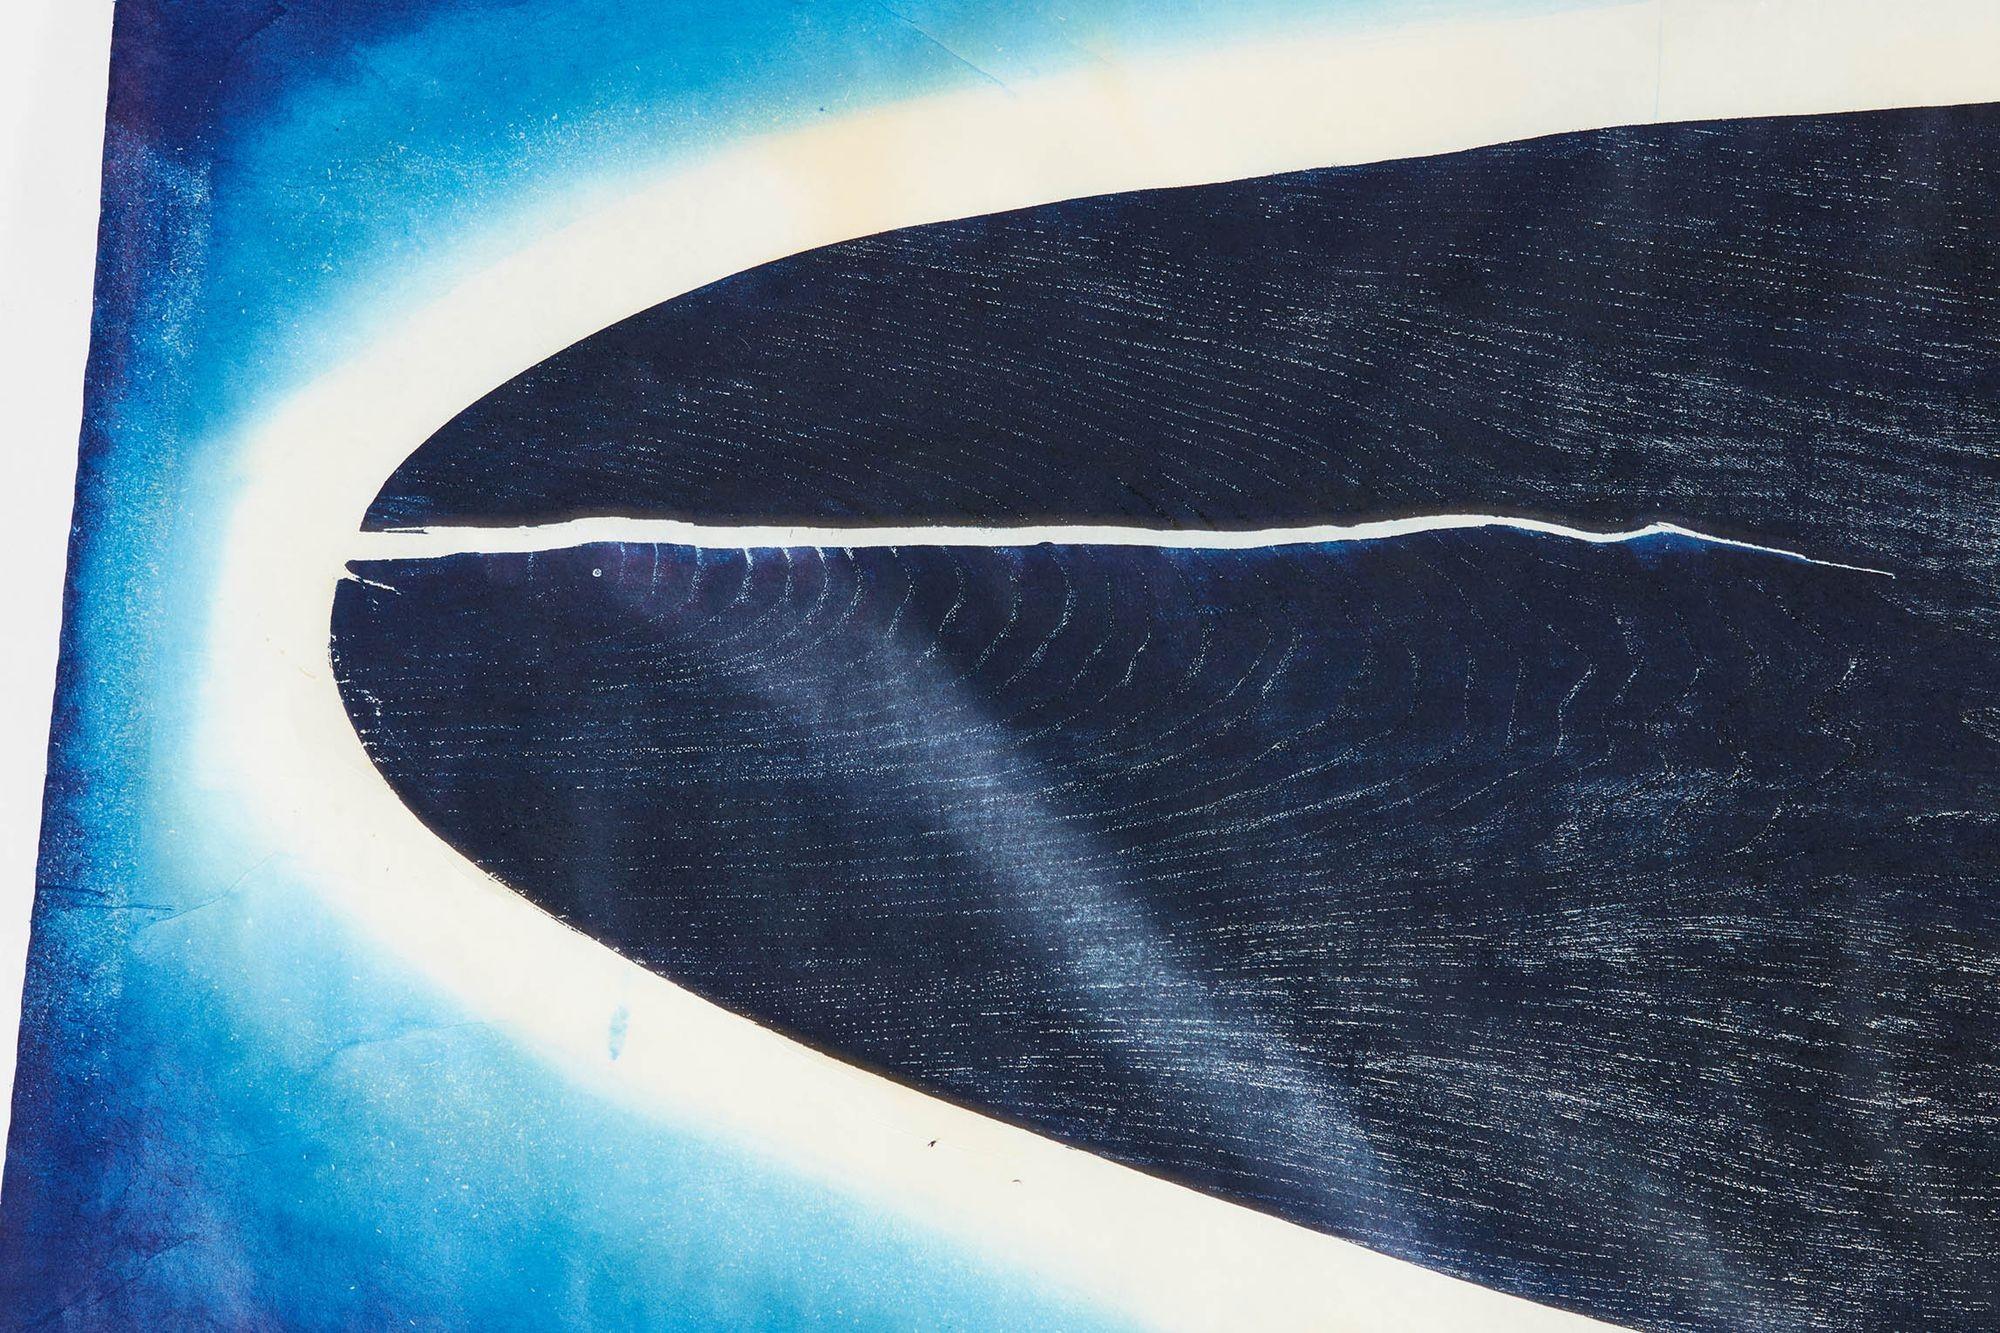 Aura Cetacean, a woodblock by British artist Julian Meredith. Meredith is noted for his beautiful depictions of whales and fish and his works are held in a number of British museums. He has also made huge artworks of whales and fish, including 600